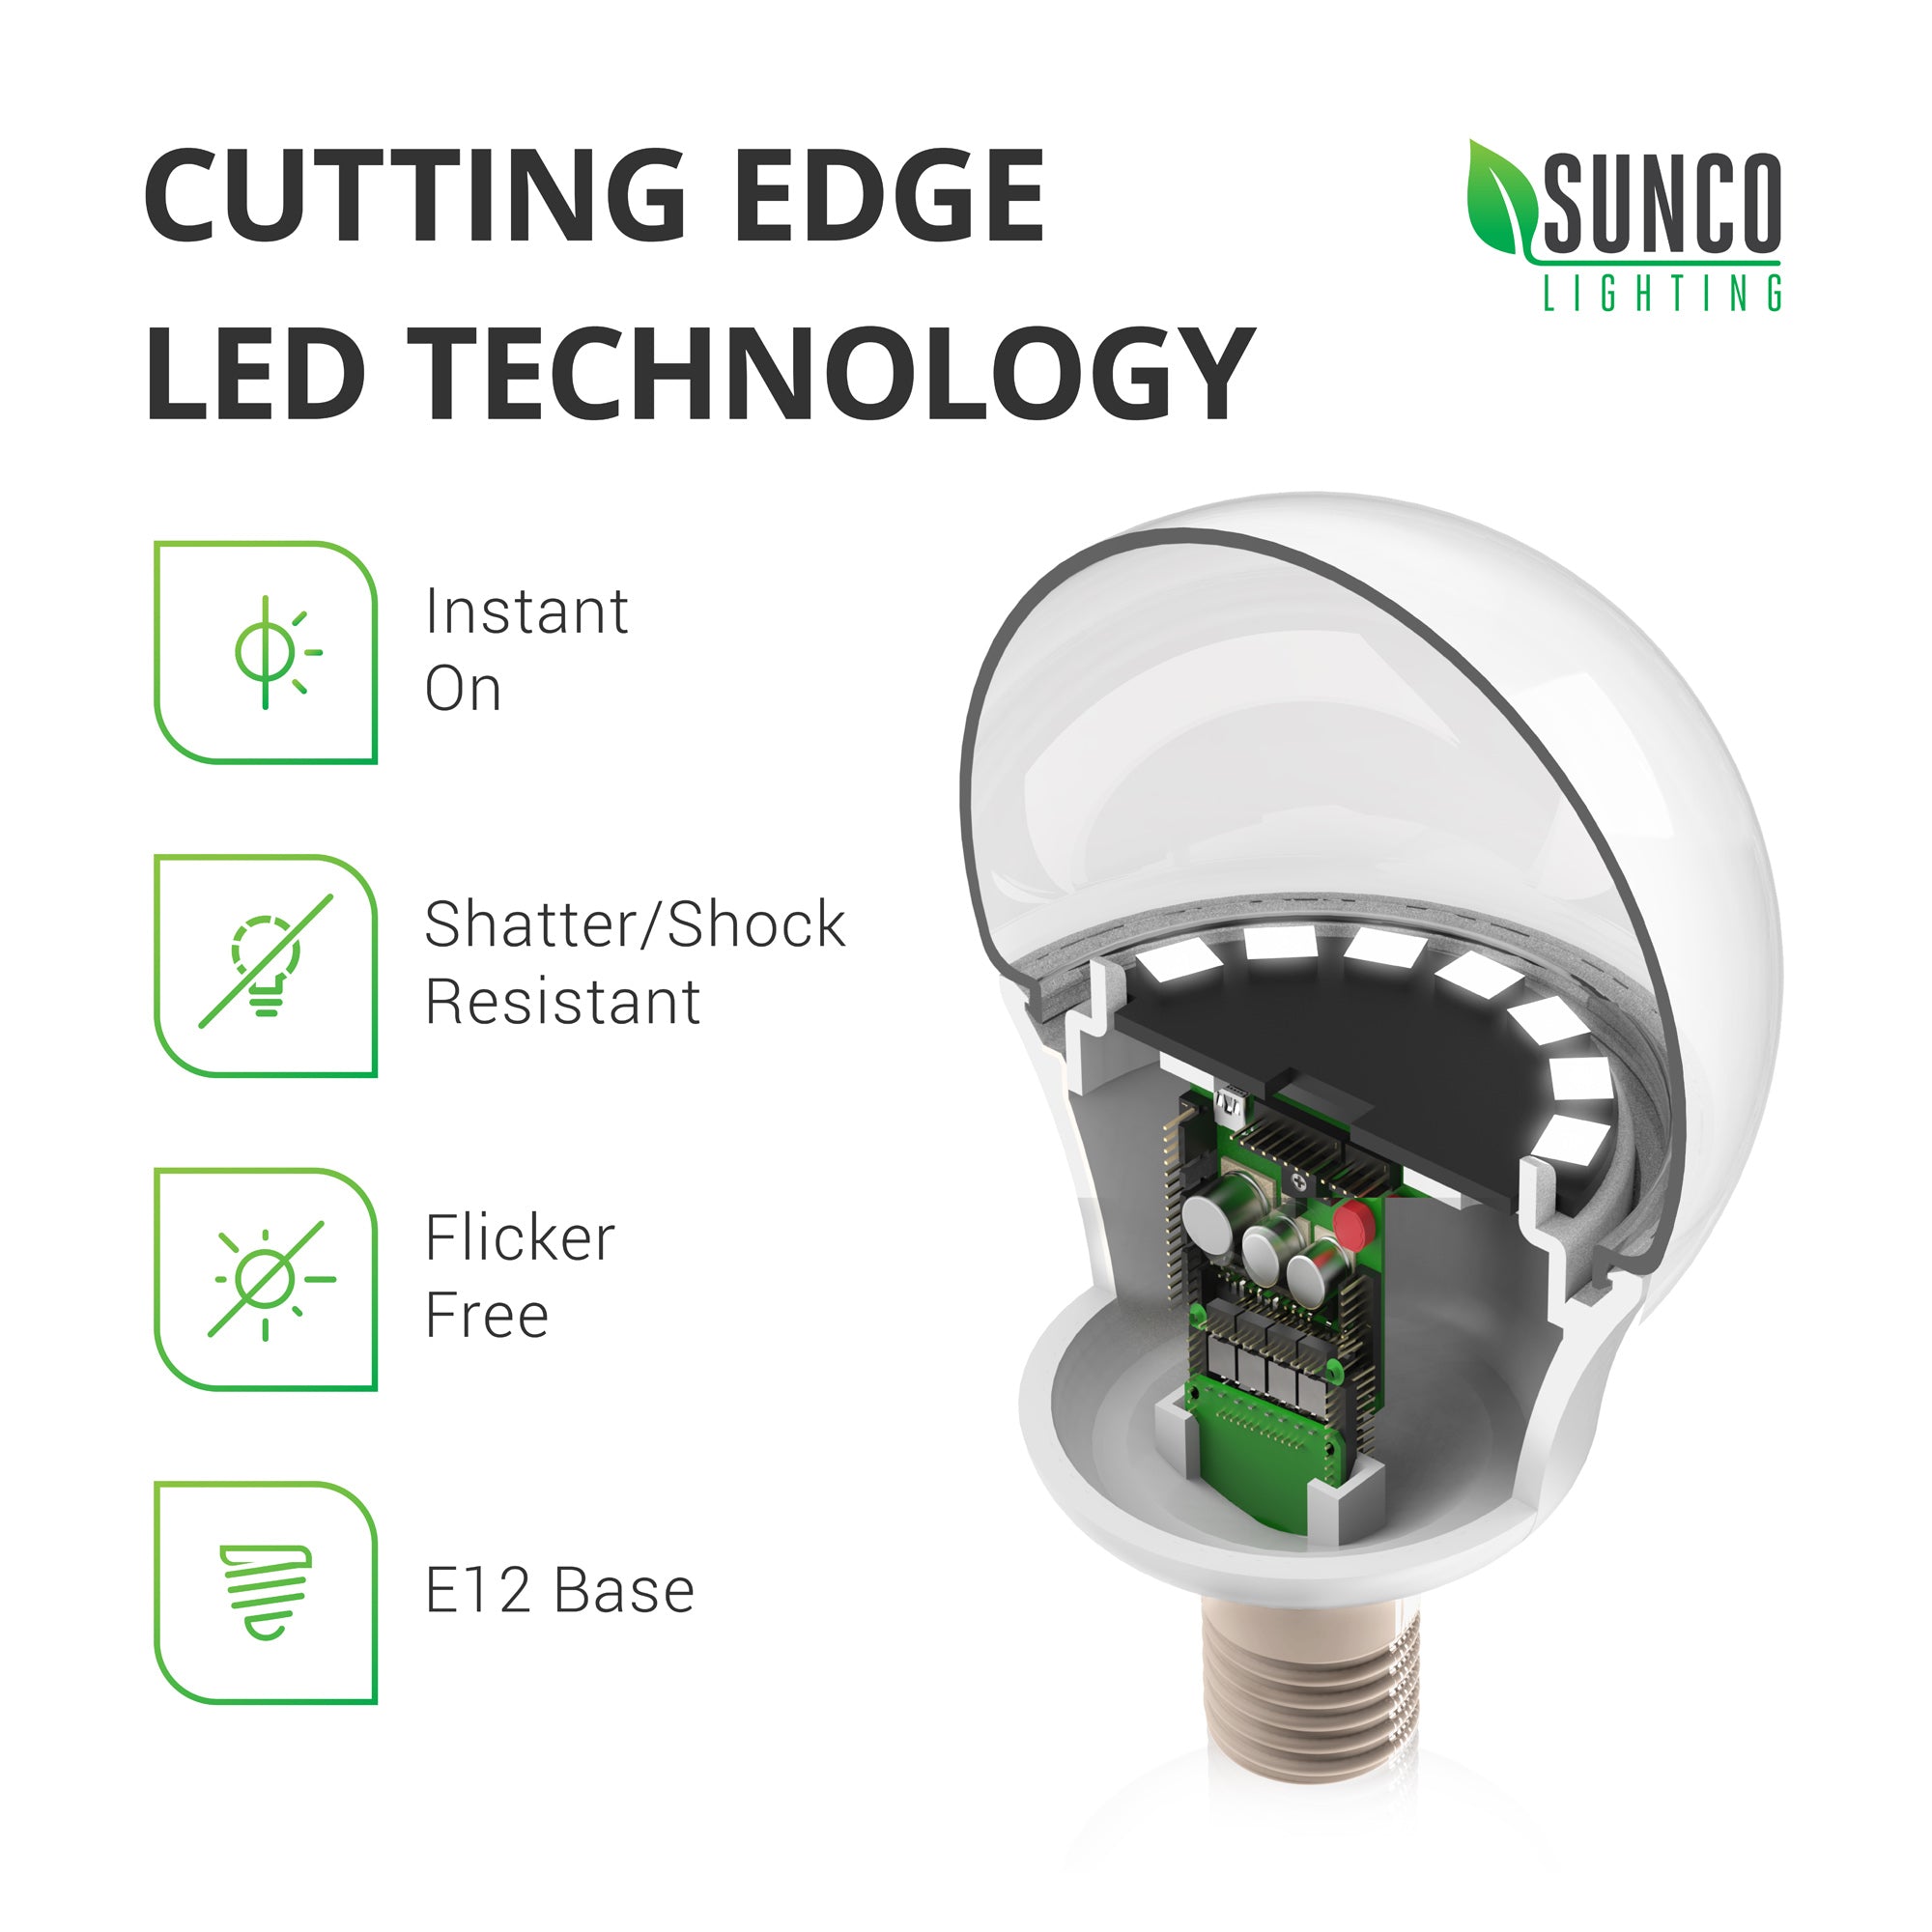 This shatter- and shock-resistant G14 LED Bulb offers cutting edge LED technology inside its durable, plastic housing. This image shows a cutaway of the G14 light bulb with the LED board inside. With a flicker free and instant on light, this compact light bulb with an E12 base is damp rated for indoor use.